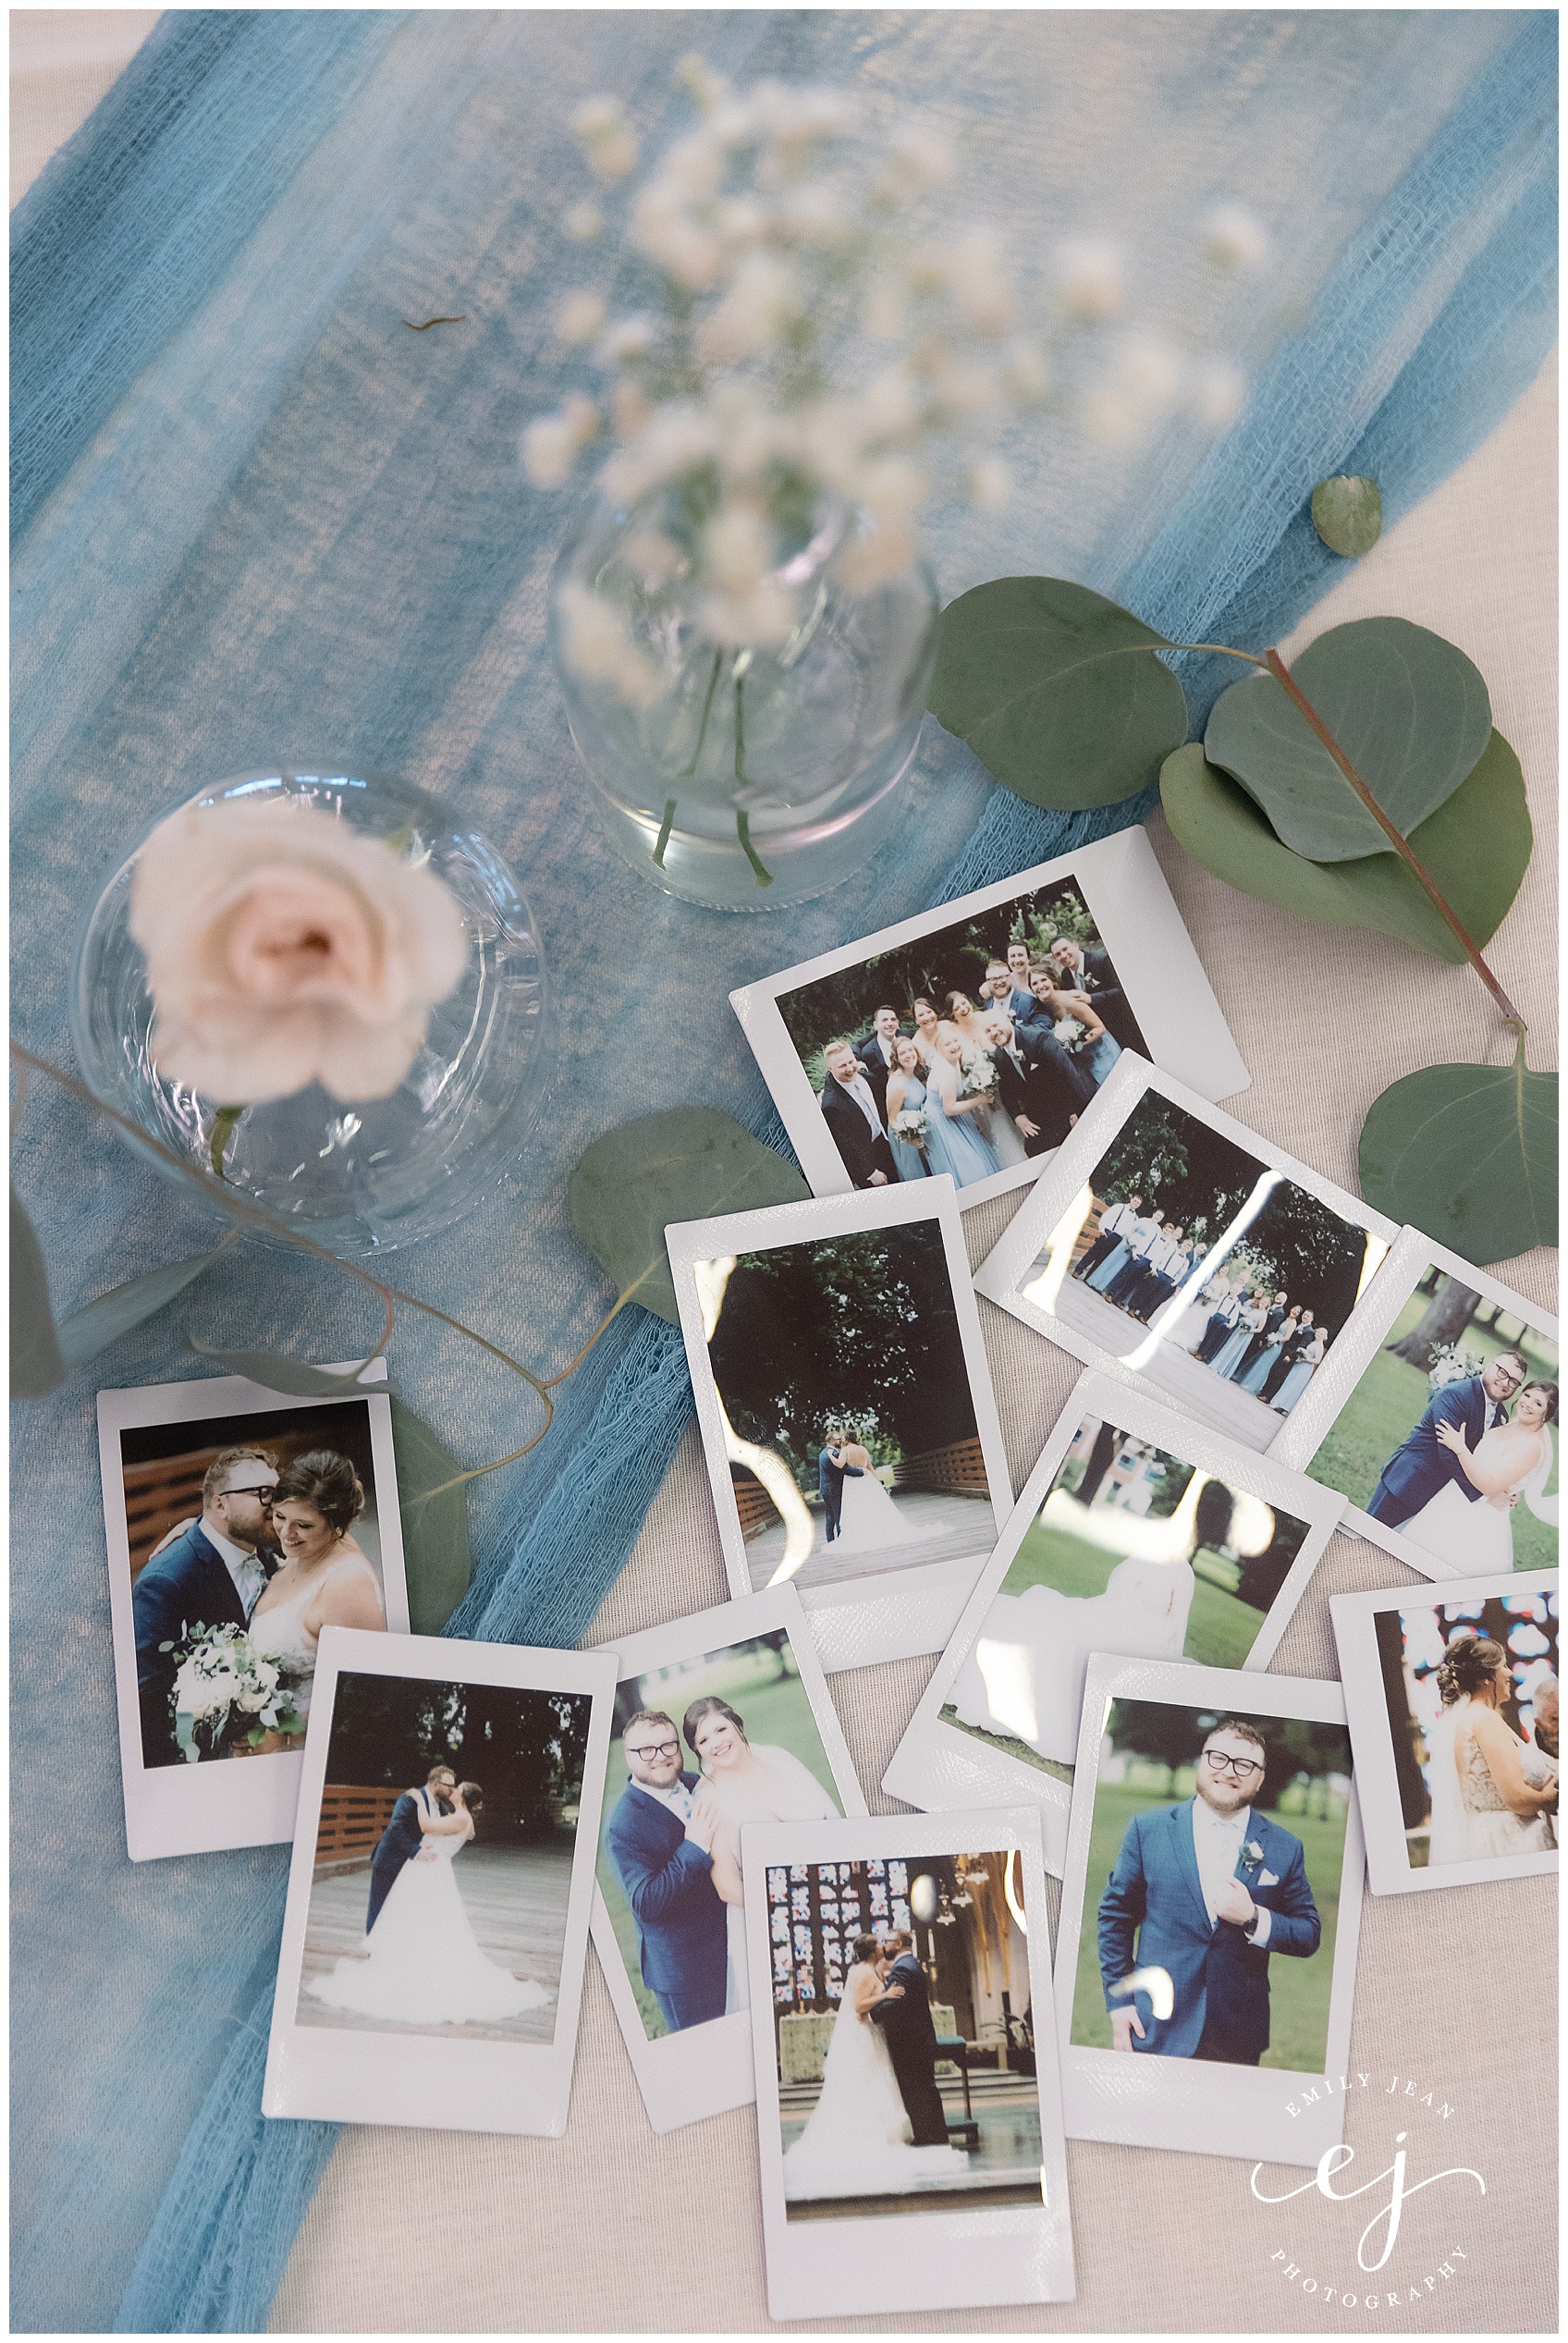 polaroid instax prints from photographer spread out on the table